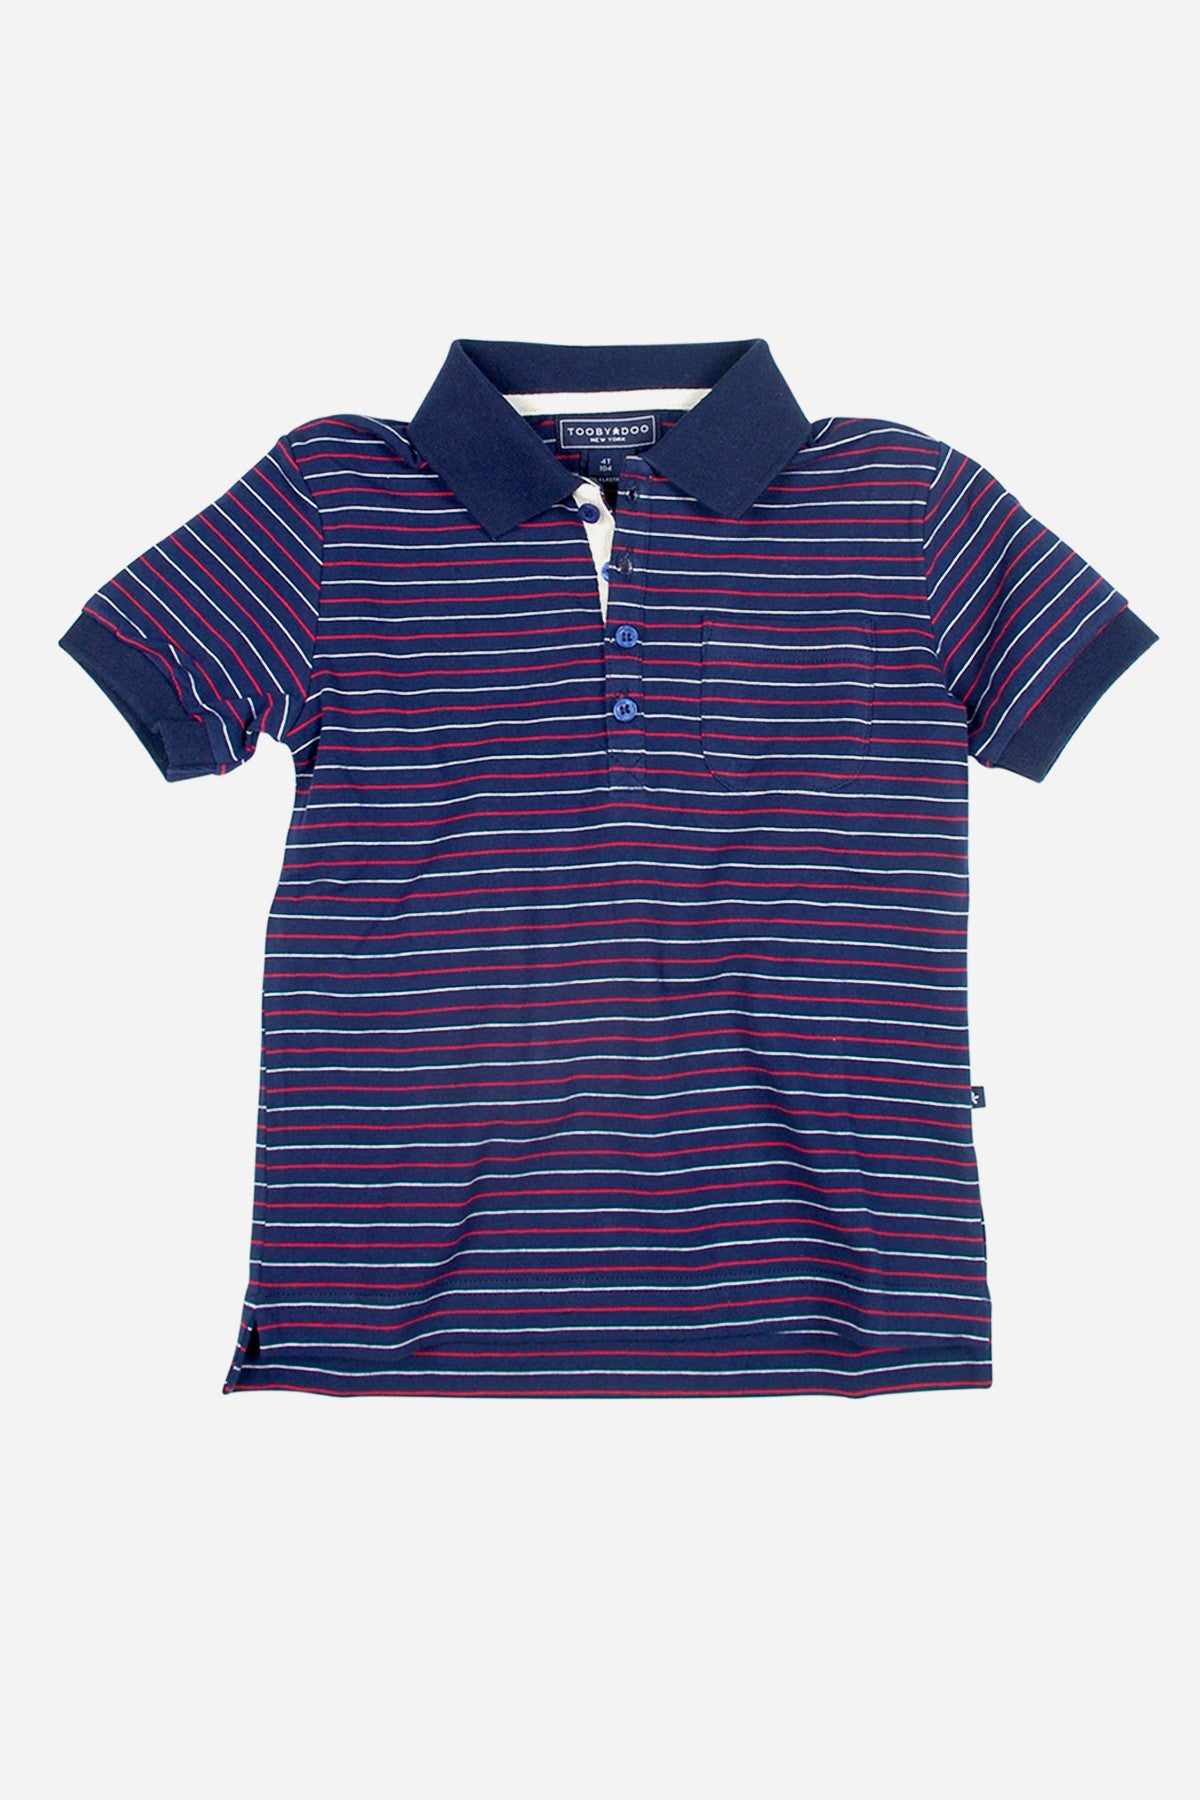 Toobydoo Boys Polo Shirt at Mini Ruby Contemporary Childrenswear